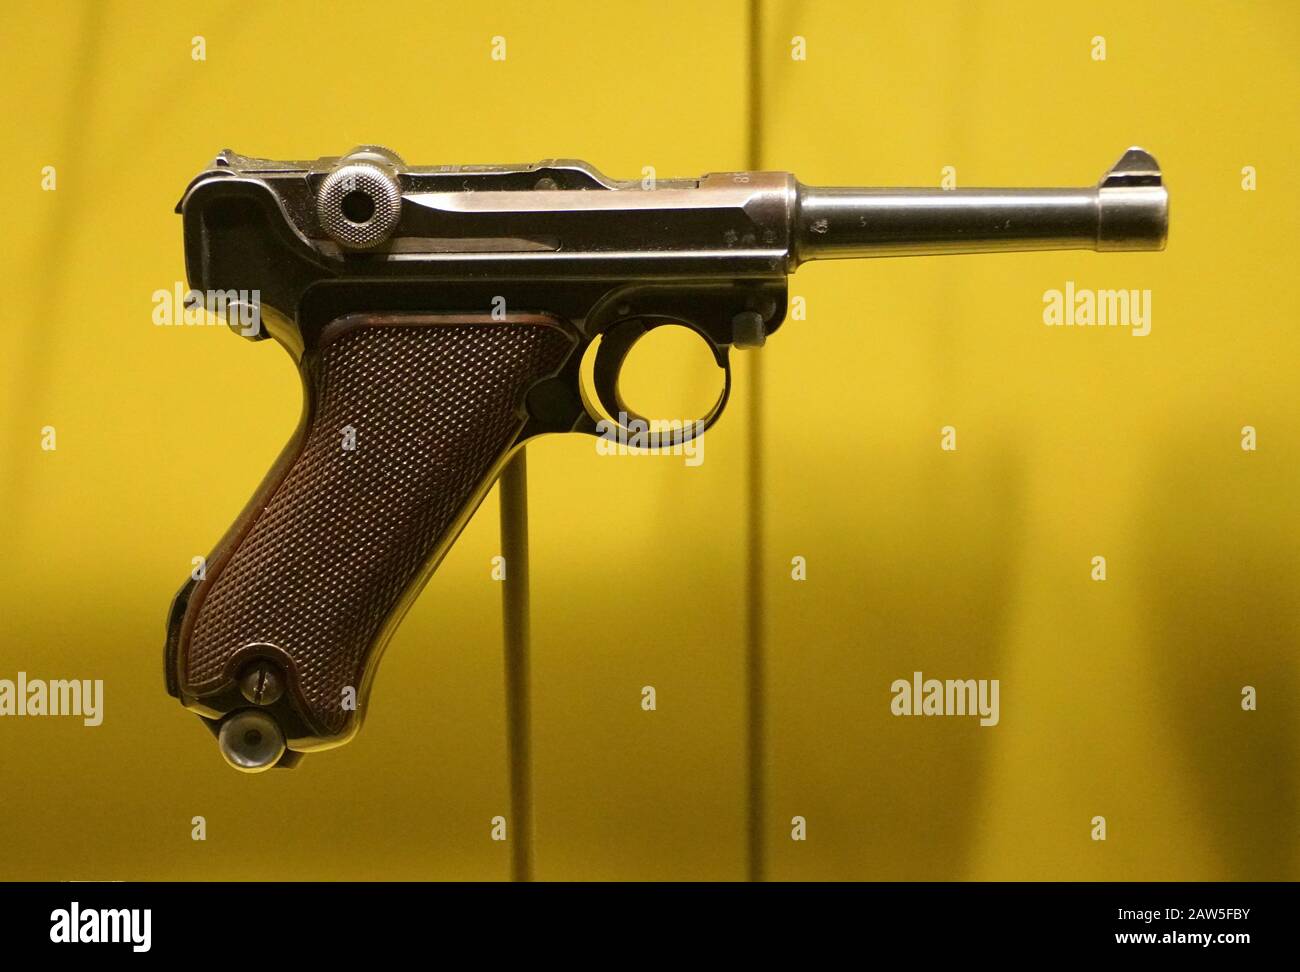 New Orleans, Louisiana, U.S.A - February 4, 2020 - The Luger P08 Pistol used by German Nazi troops during World War 2 Stock Photo